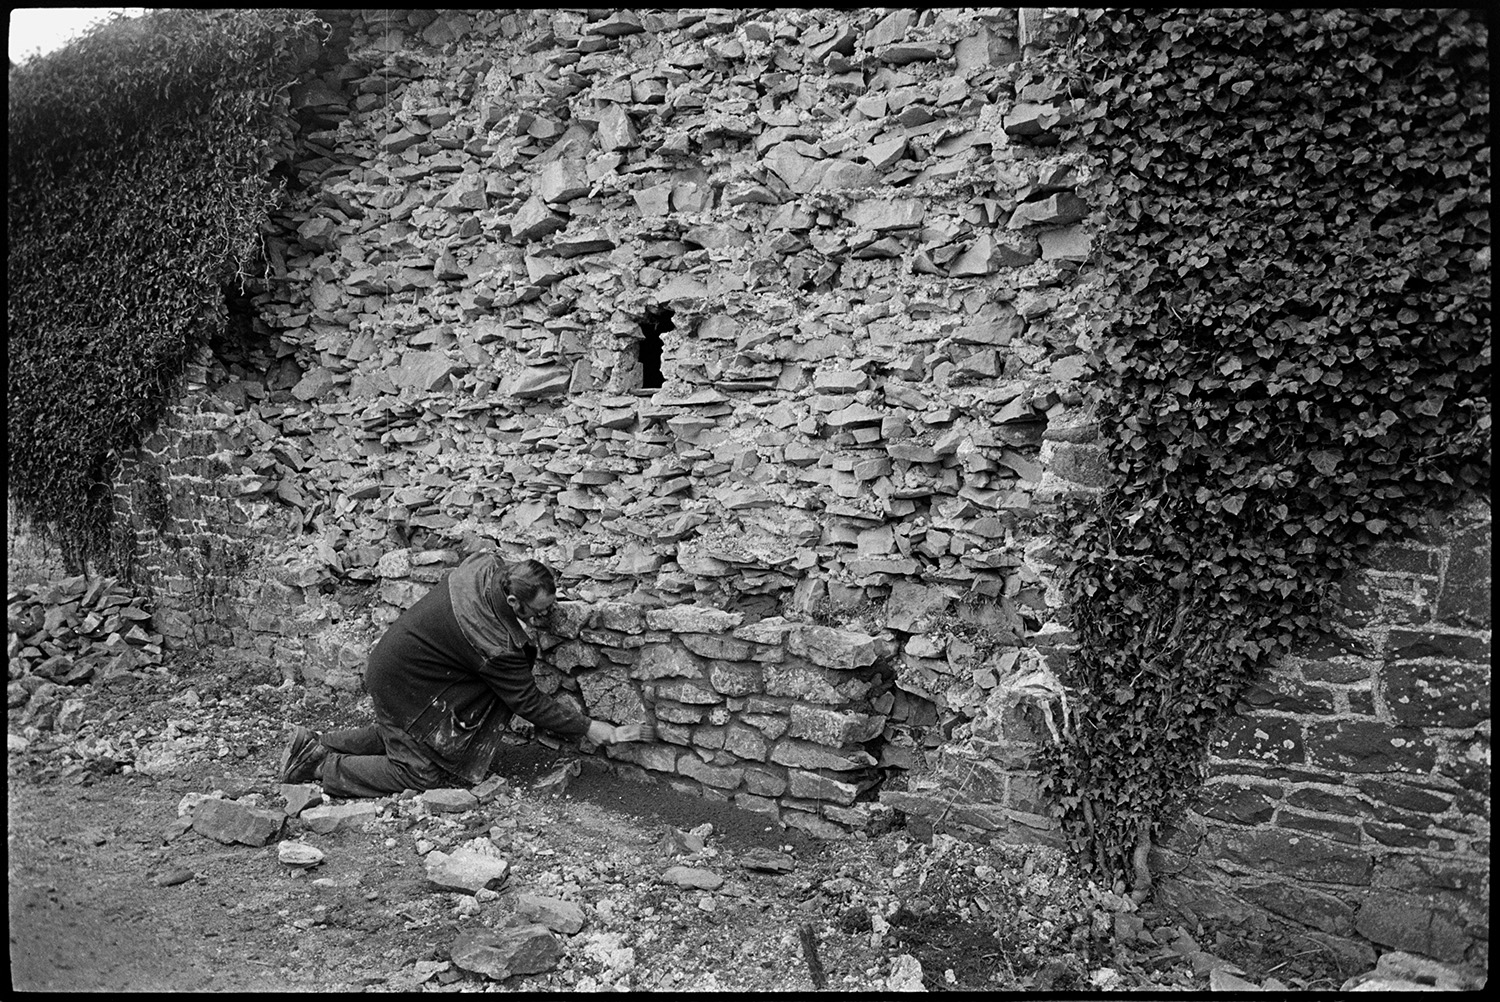 Man repairing stone wall of barn which had collapsed.
[A man repairing the large stone wall of a barn near Coldridge. Ivy is covering much of the wall.]